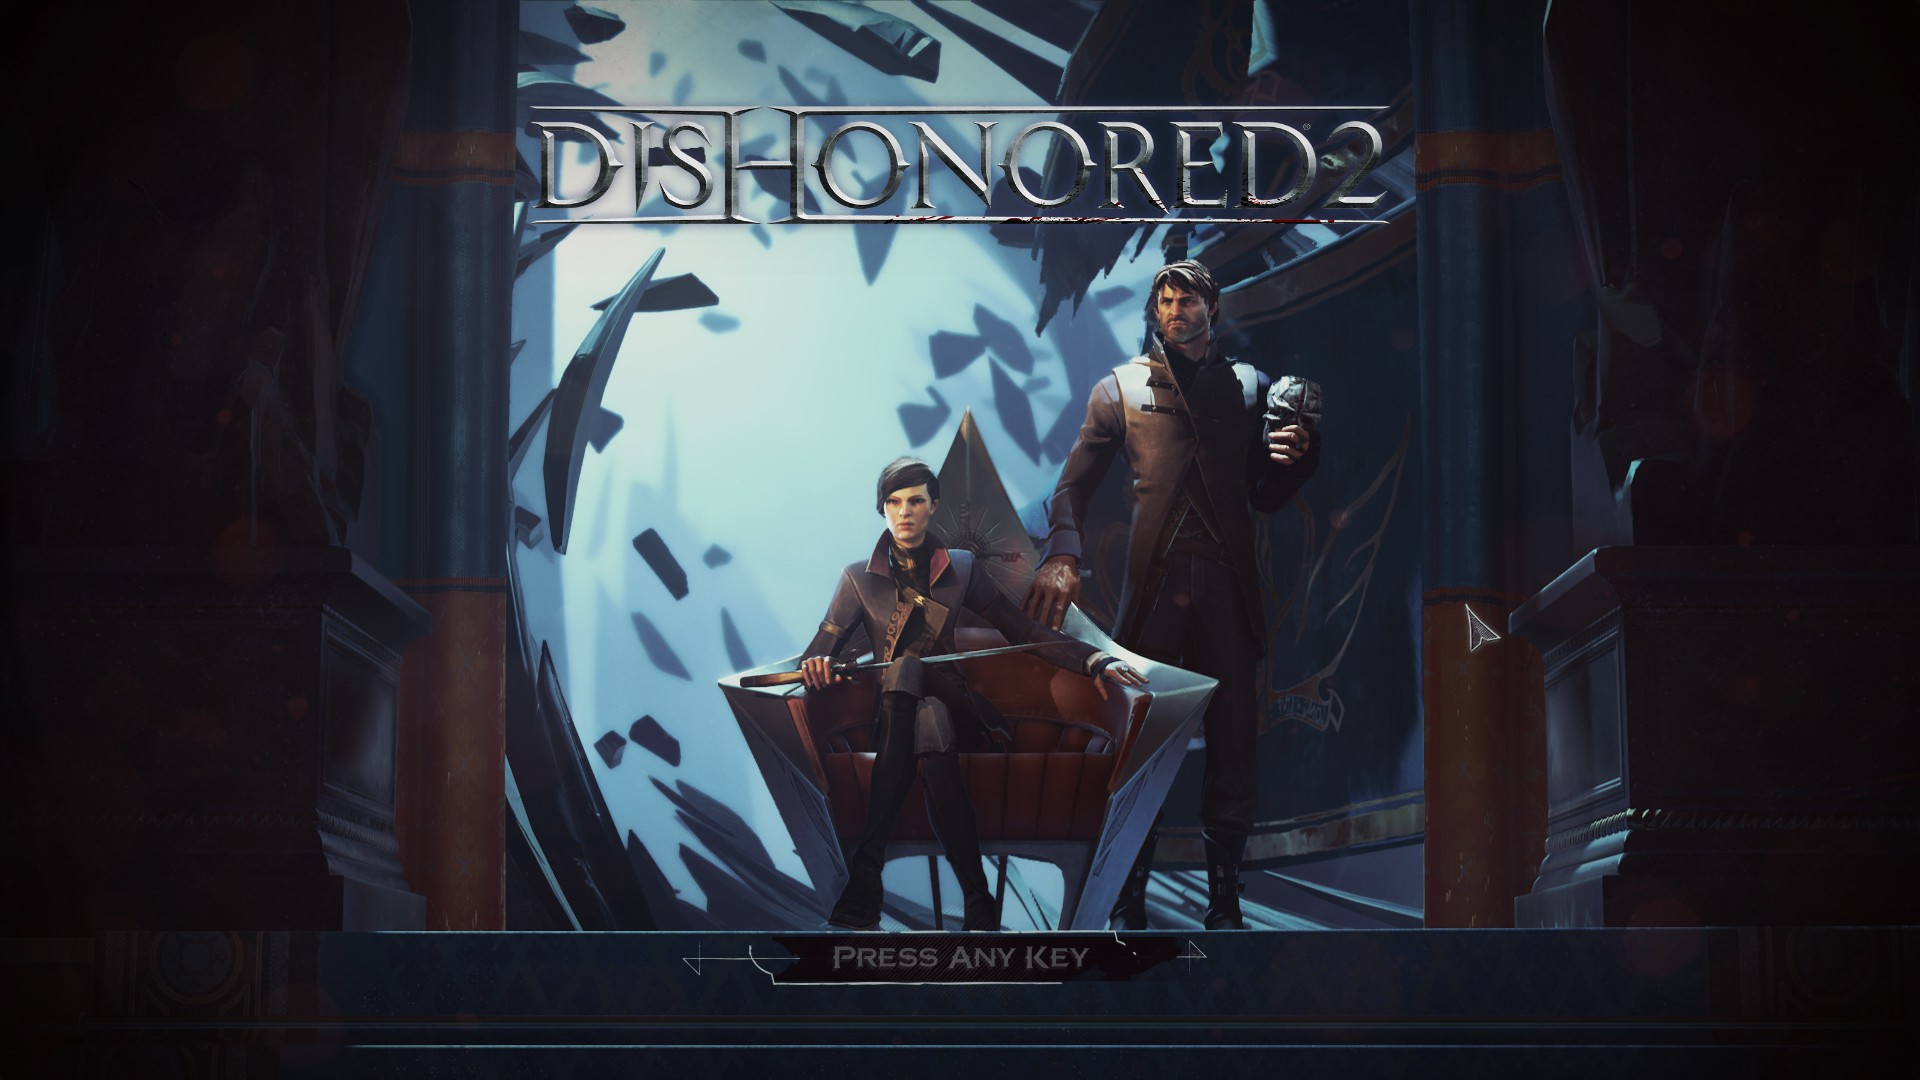 Guide of Dishonored 2 2.0 Free Download